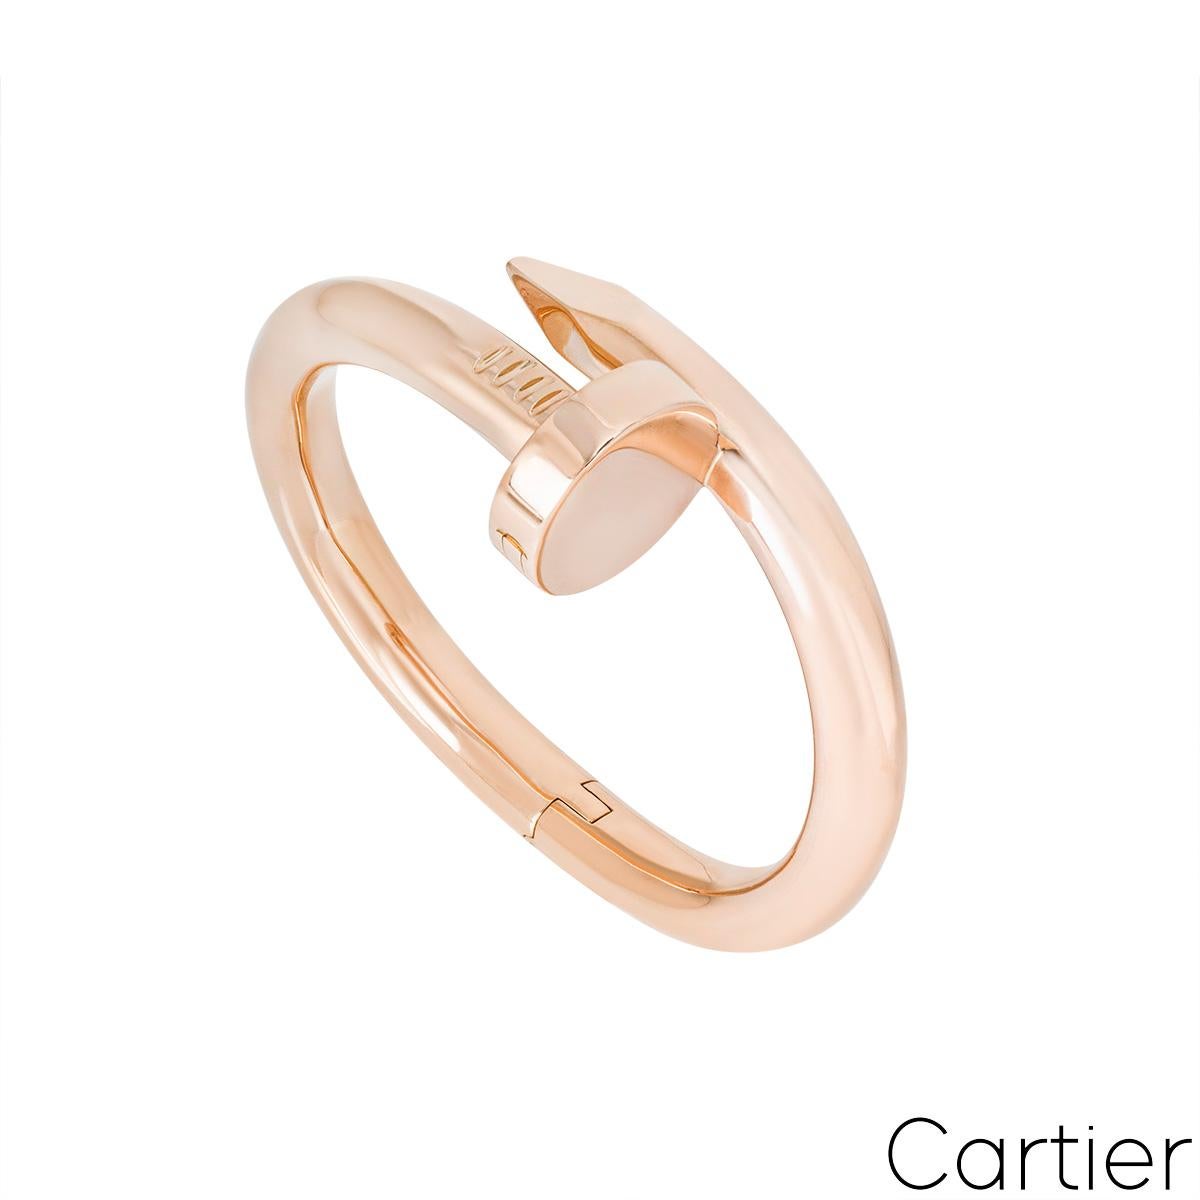 An 18k rose gold Cartier bracelet from the Juste Un Clou collection. The bracelet is a large model of the classic Juste Un Clou design, with the iconic nail head at one end and nail end at the other. The bracelet features a hinged opening with an